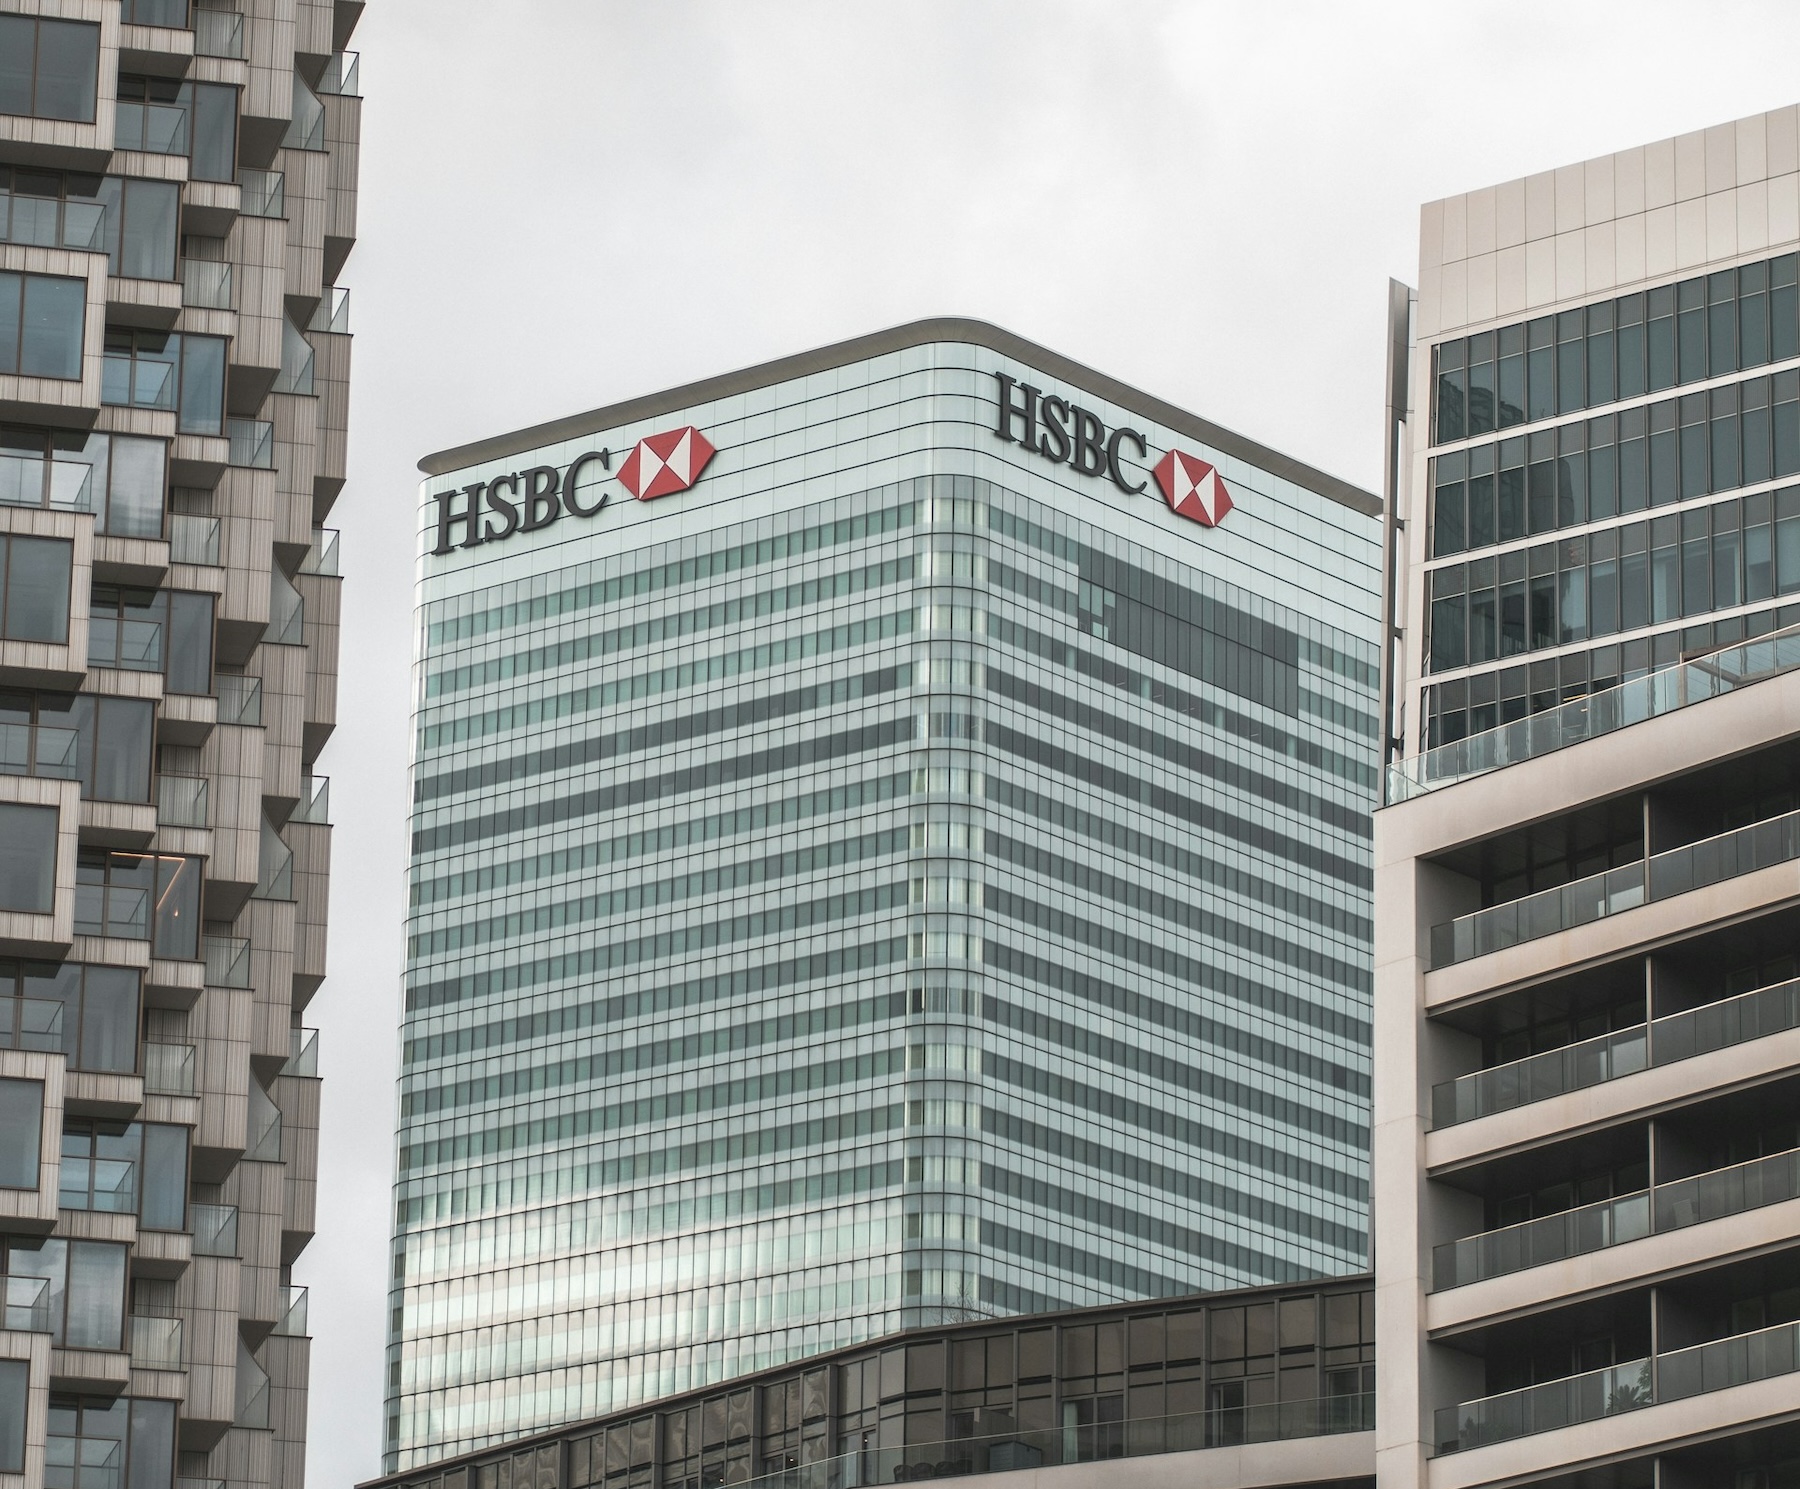 Second-largest PRA fine hits HSBC for £57.4m over 'serious failings' in customer deposit safeguards